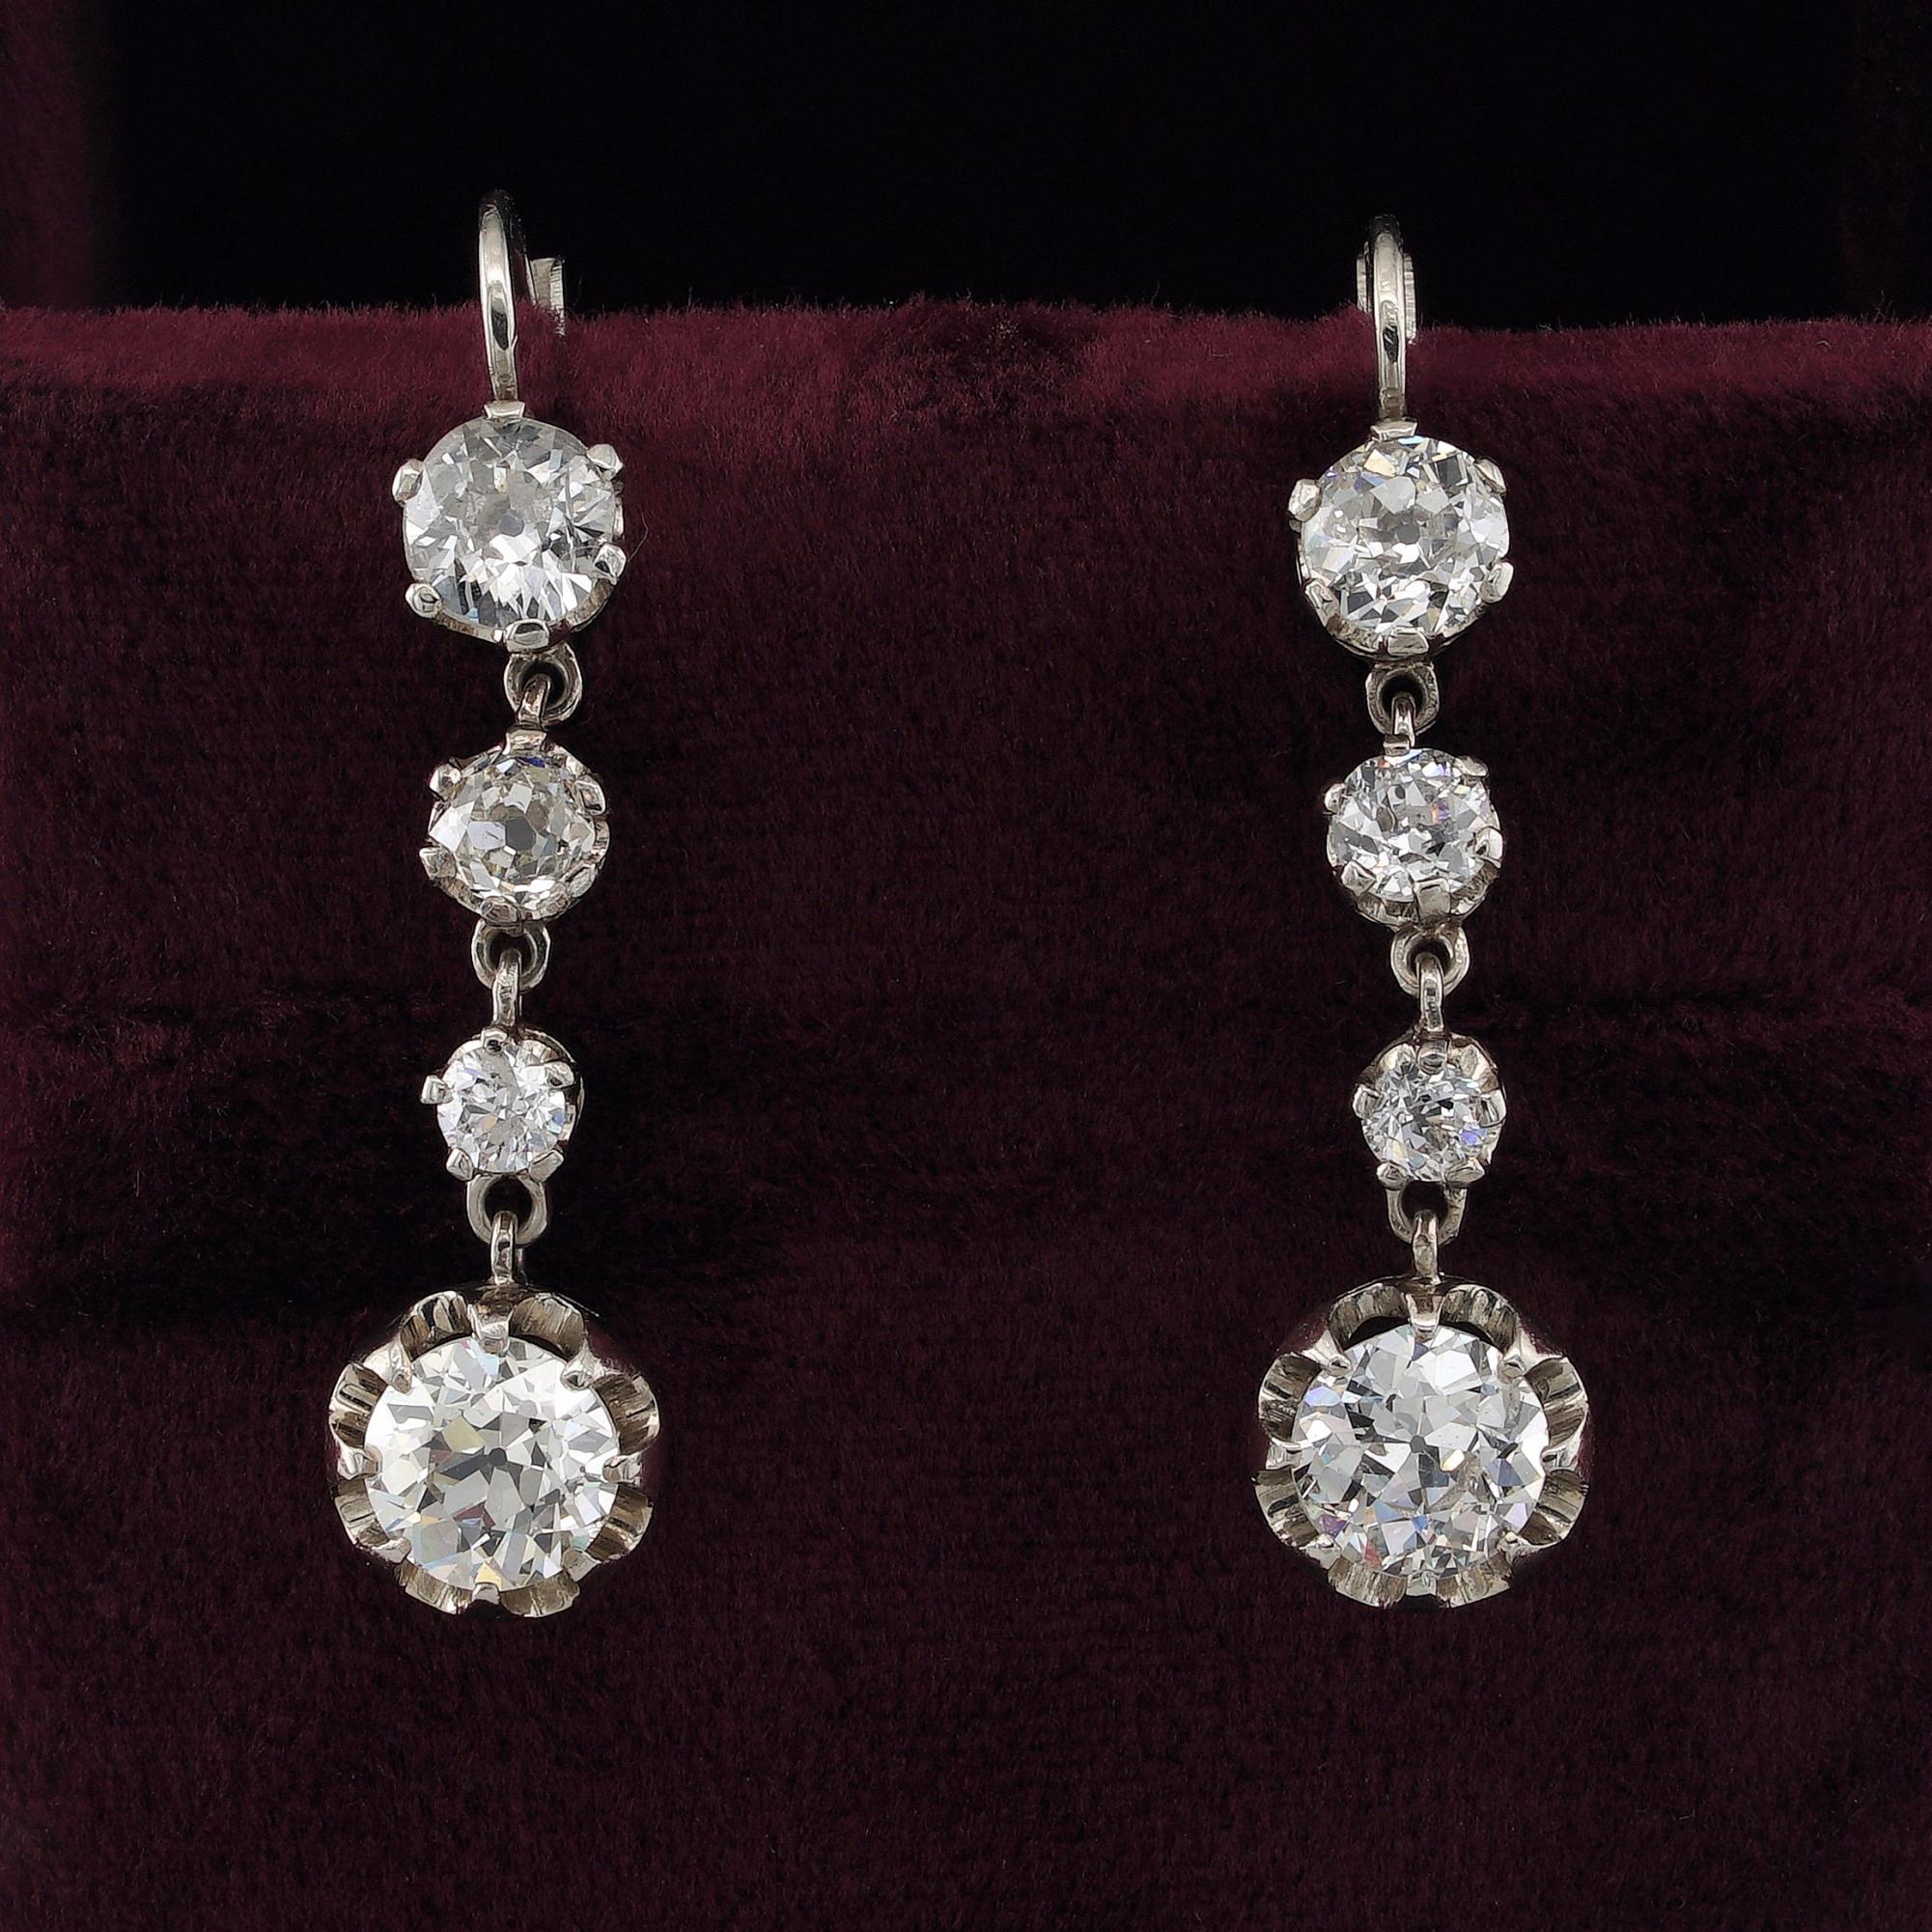 Classy Art Deco Statement
Sparkly and sexy Art Deco Diamond swing line earrings
A classy statement of the 20’s survived keeping the full splendor to fulfill with beauty some special one
Genuine 1925 ca bearing Italian hallmarks of period, hand